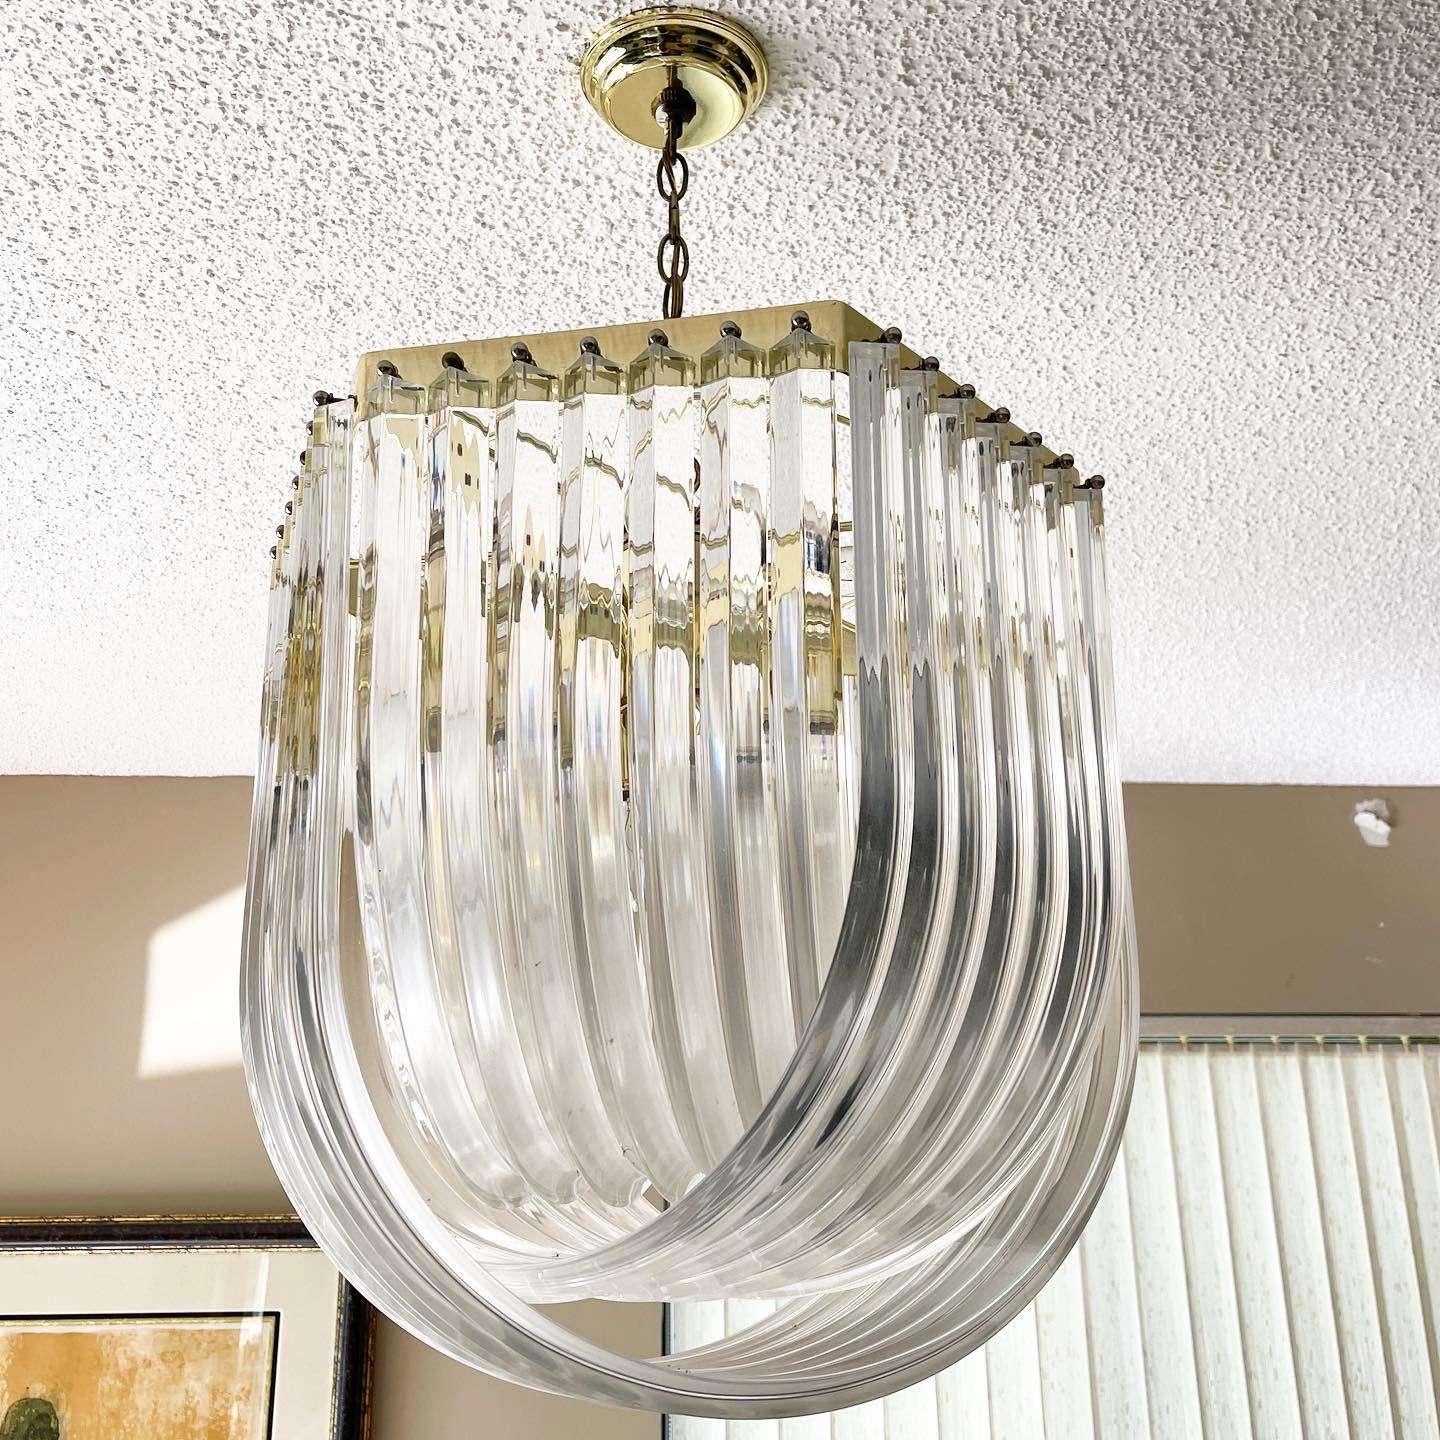 Exceptional extra large vintage Hollywood regency gold lucite ribbon loop chandelier. In the style of Carlo Nason this curved clear lucite triedri prism chandelier is jaw dropping.